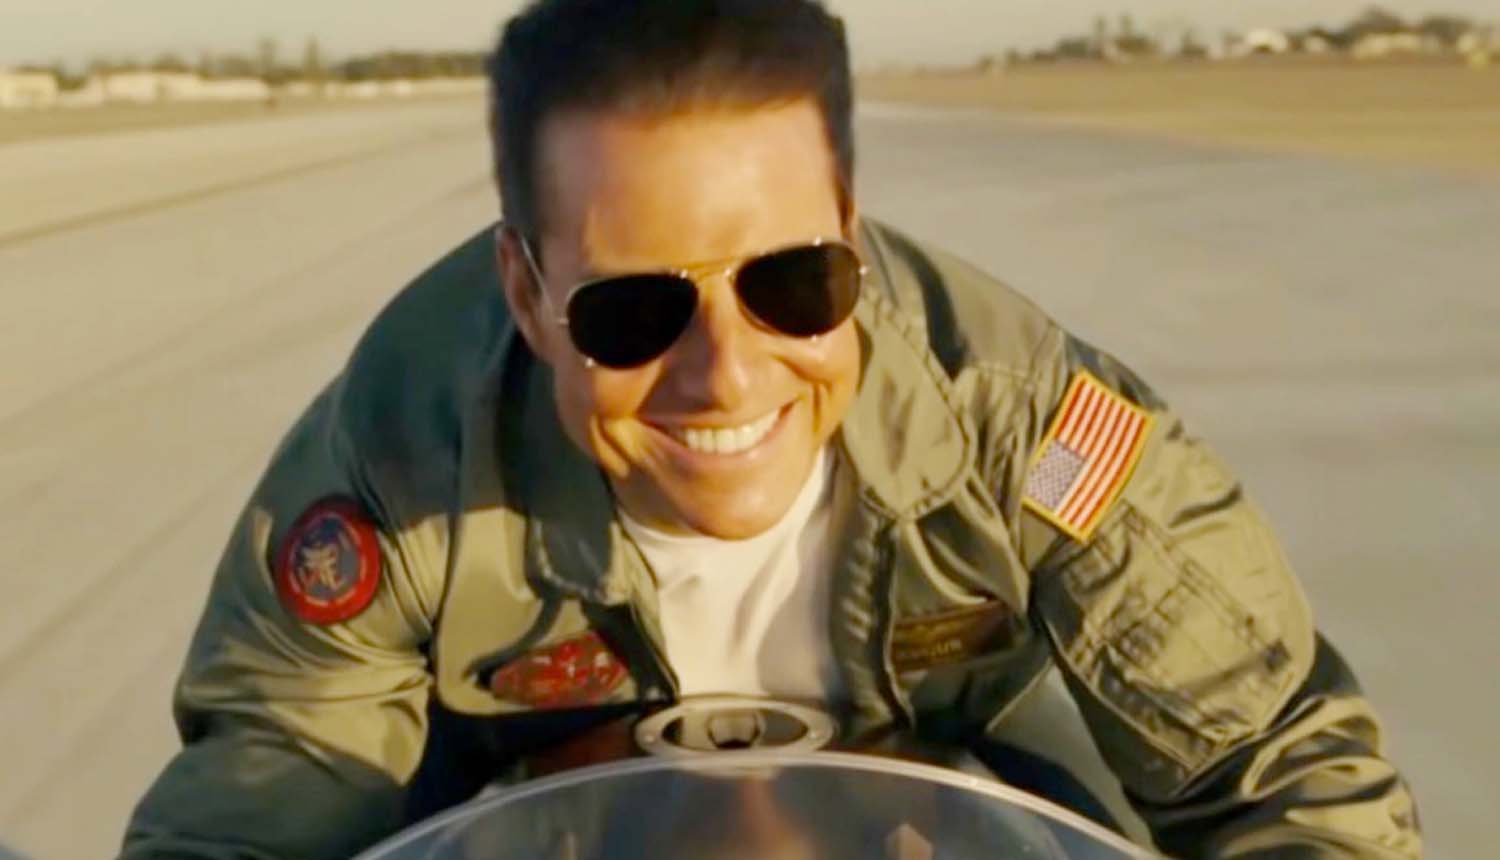 Rooster vs. Hangman: Who The Better Top Gun Pilot Really Is